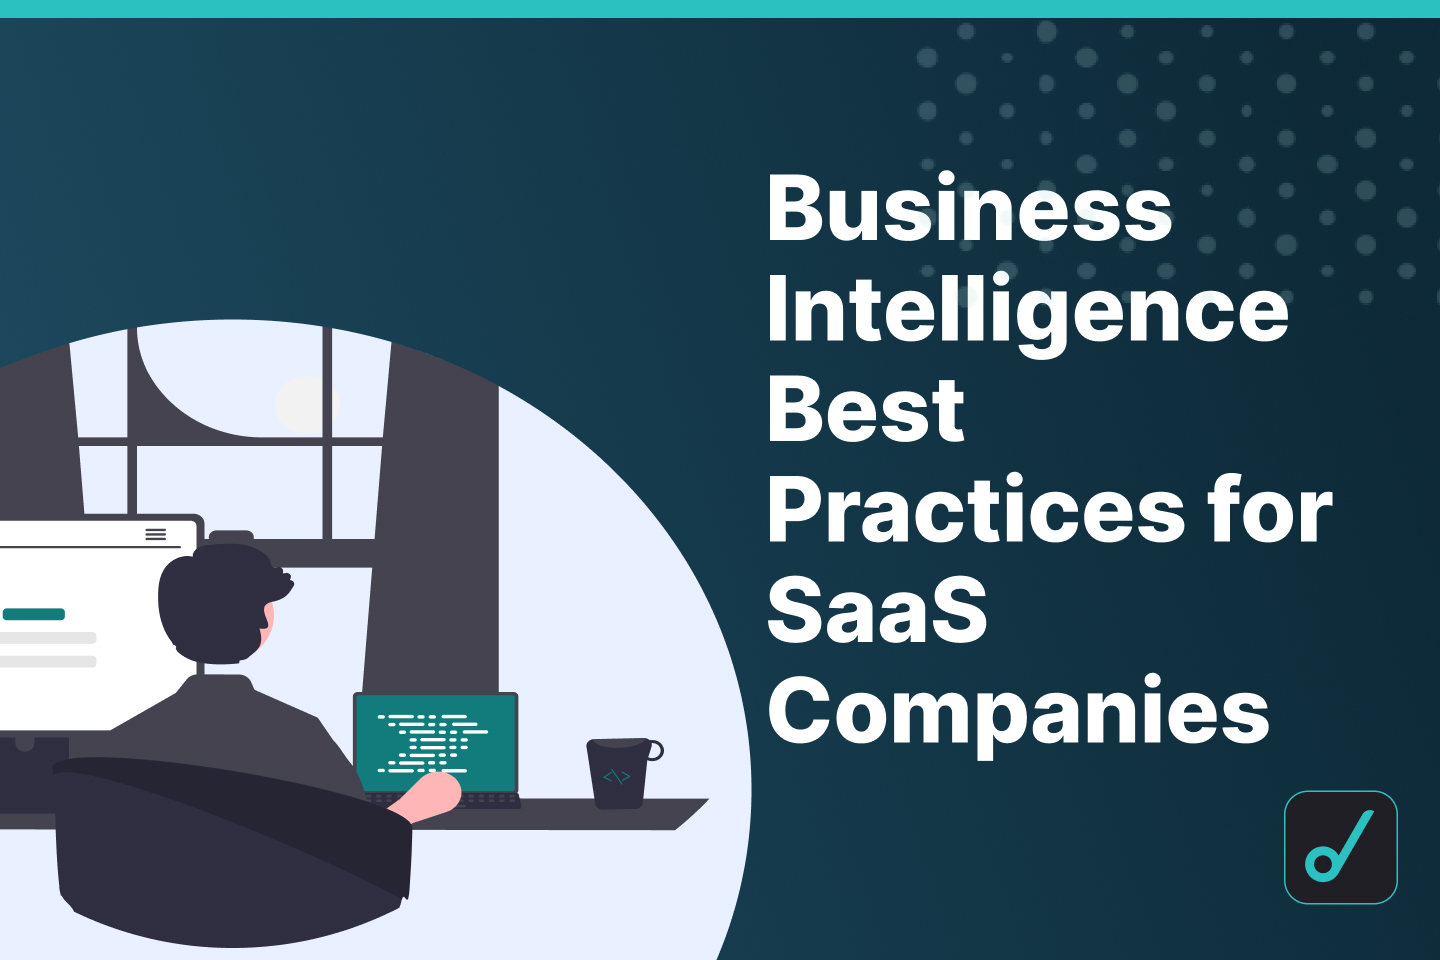 SaaS Business Intelligence Best Practices You Need to Implement